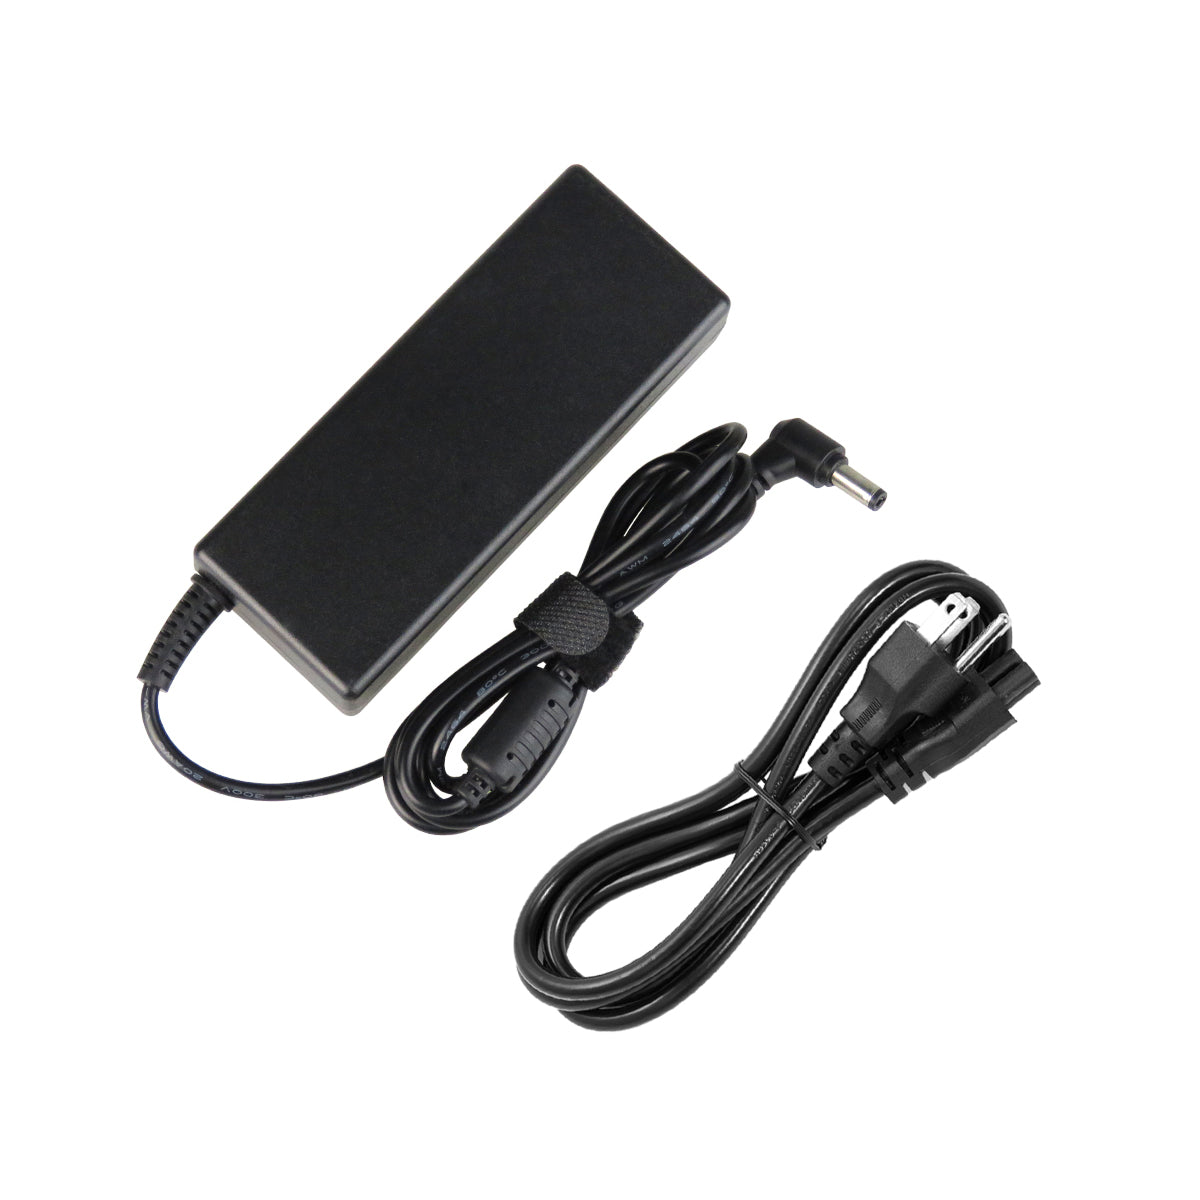 AC Adapter Charger for Gateway T-63 Series T-6339u Notebook.